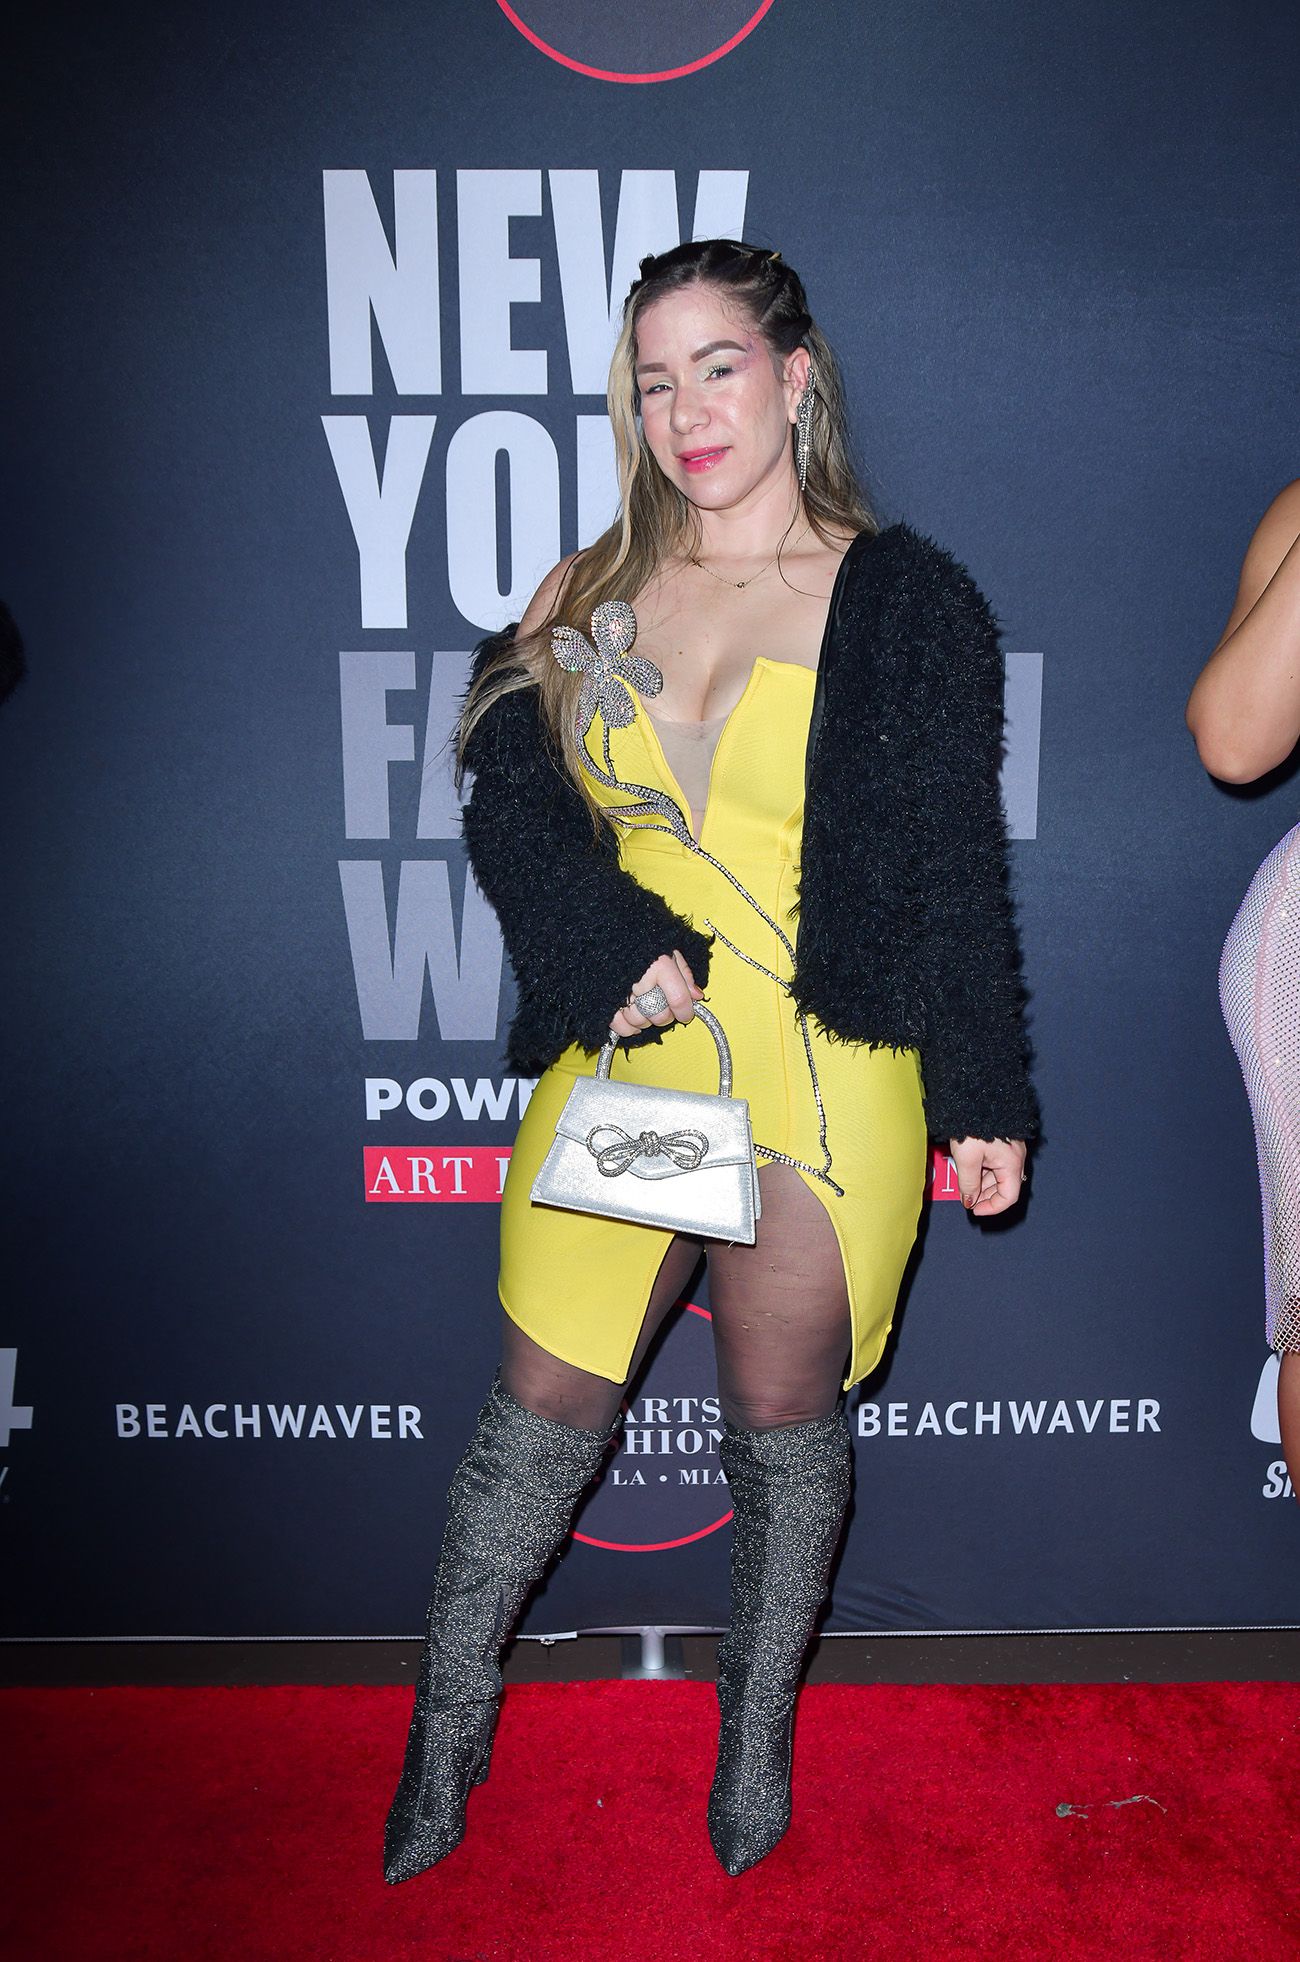 NEW YORK, NEW YORK - FEBRUARY 08: Beatriz De Leon arrives on the red carpet during New York Fashion Week Powered by Art Hearts Fashion at The Angel Orensanz Foundation on February 08, 2024 in New York City.  (Photo by Mark Gunter/Getty Images for Art Hearts Fashion)